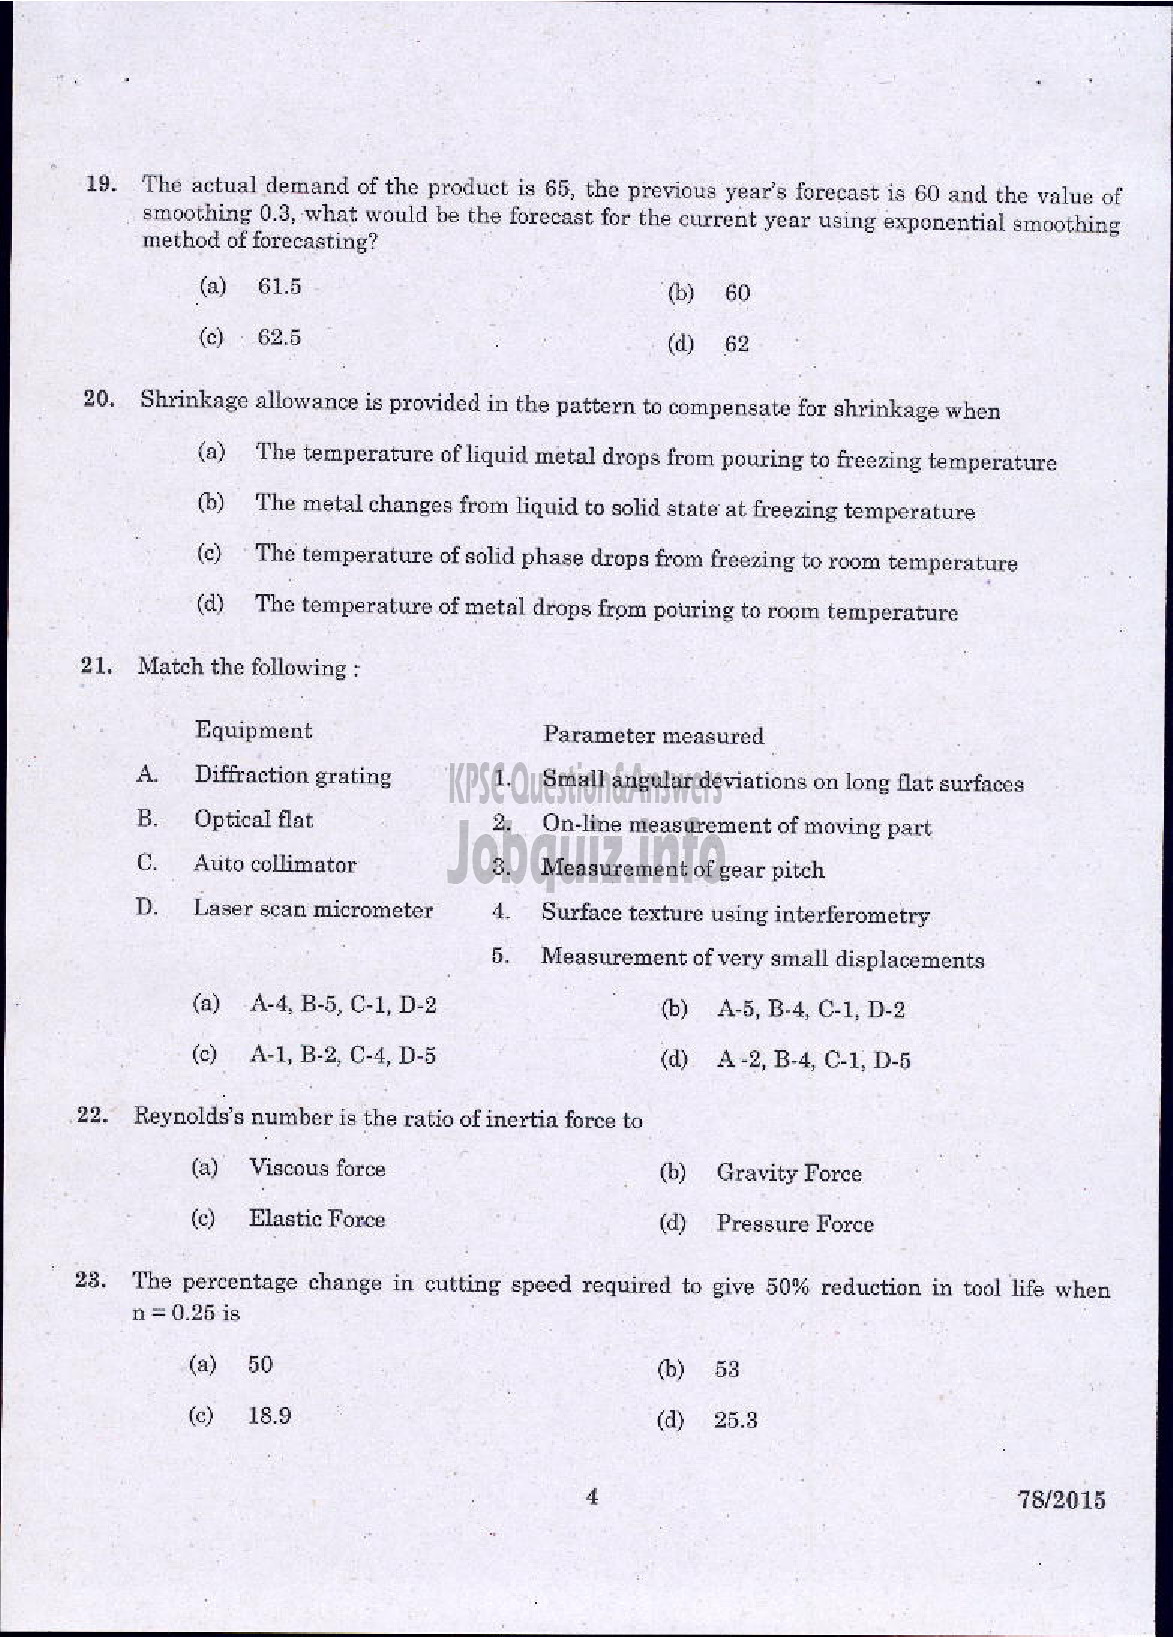 Kerala PSC Question Paper - MECHANICAL ENGINEERING-3